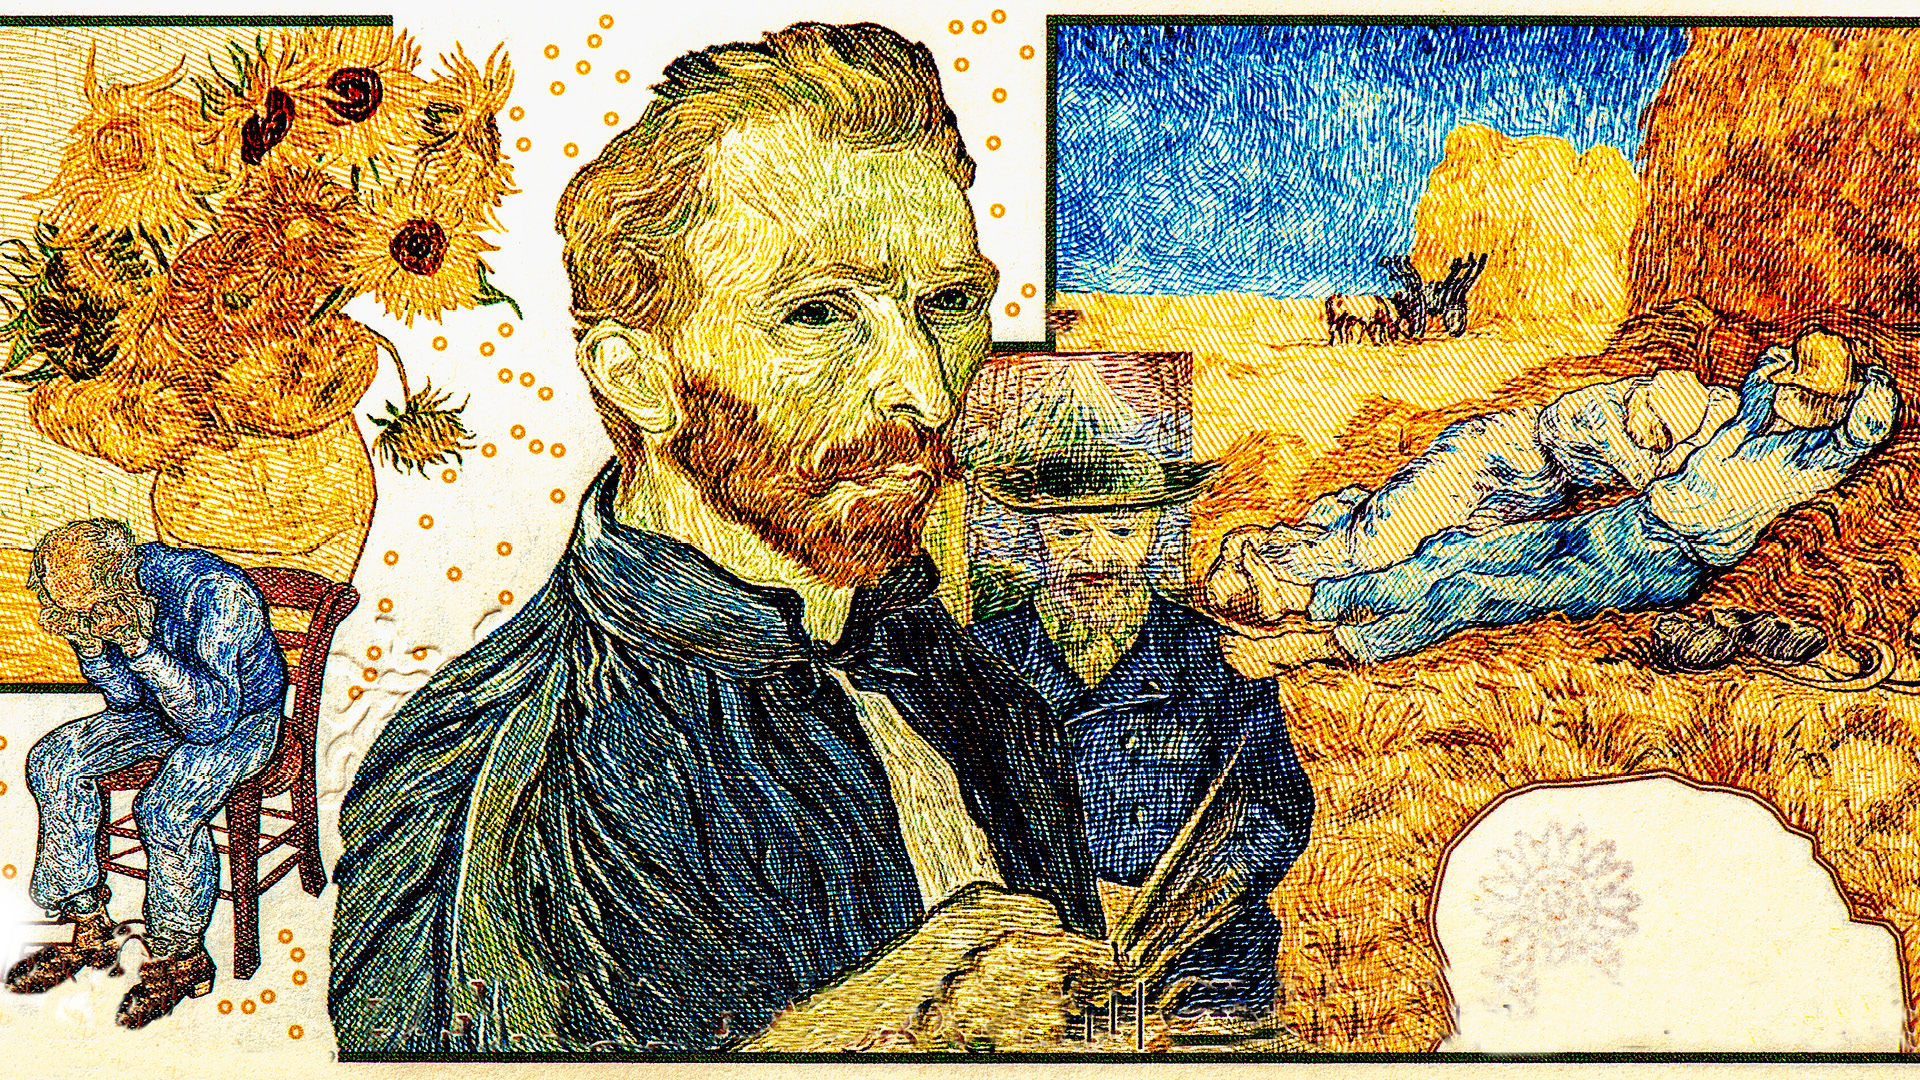 Toronto Is Hosting The World’s First Drive-In Van Gogh Exhibition This June